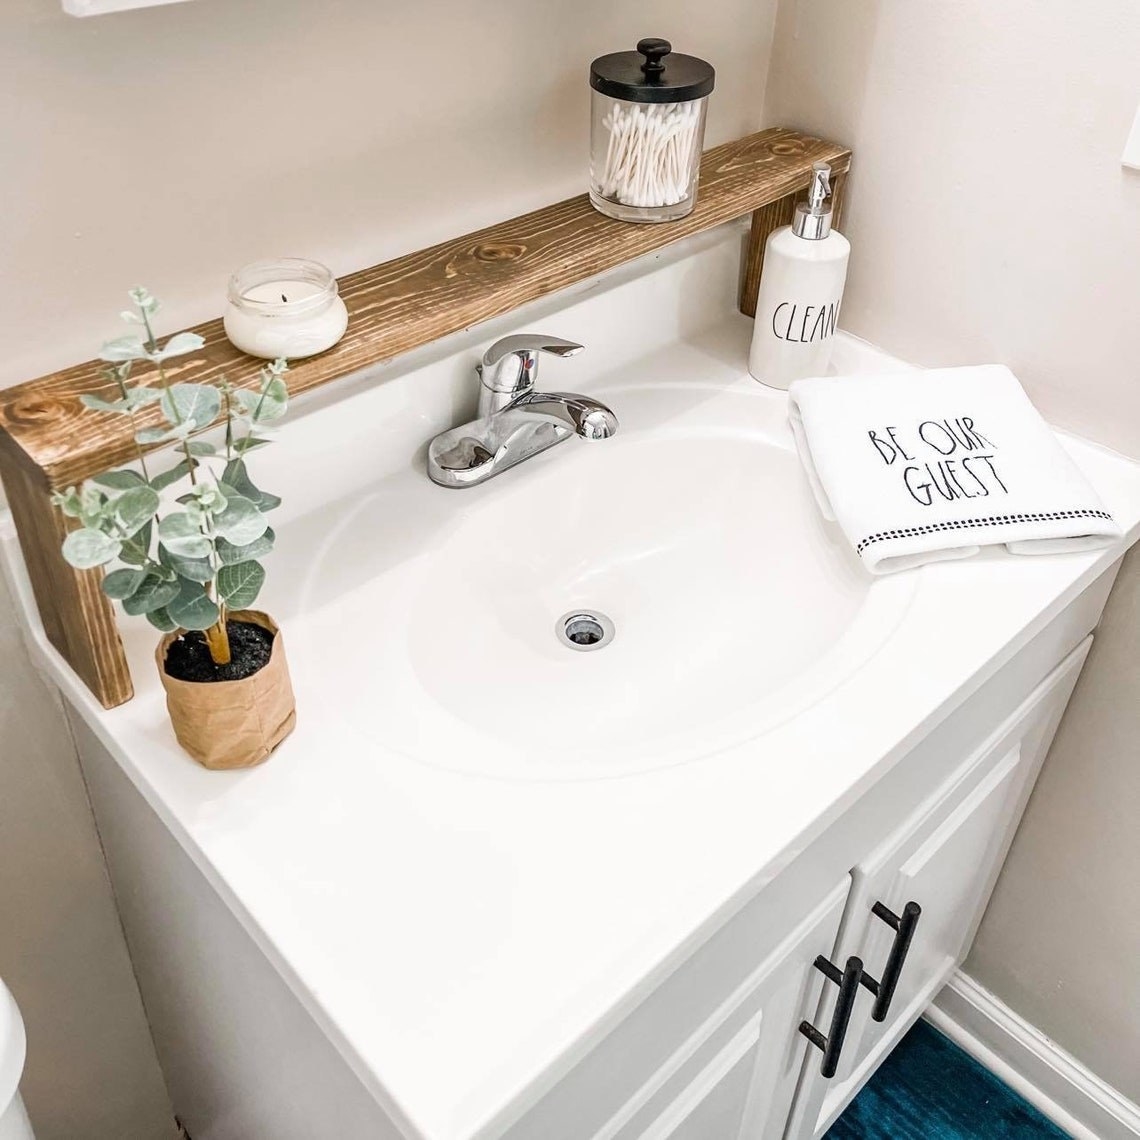 A rustic brown shelf placed over the back of a bathroom sink